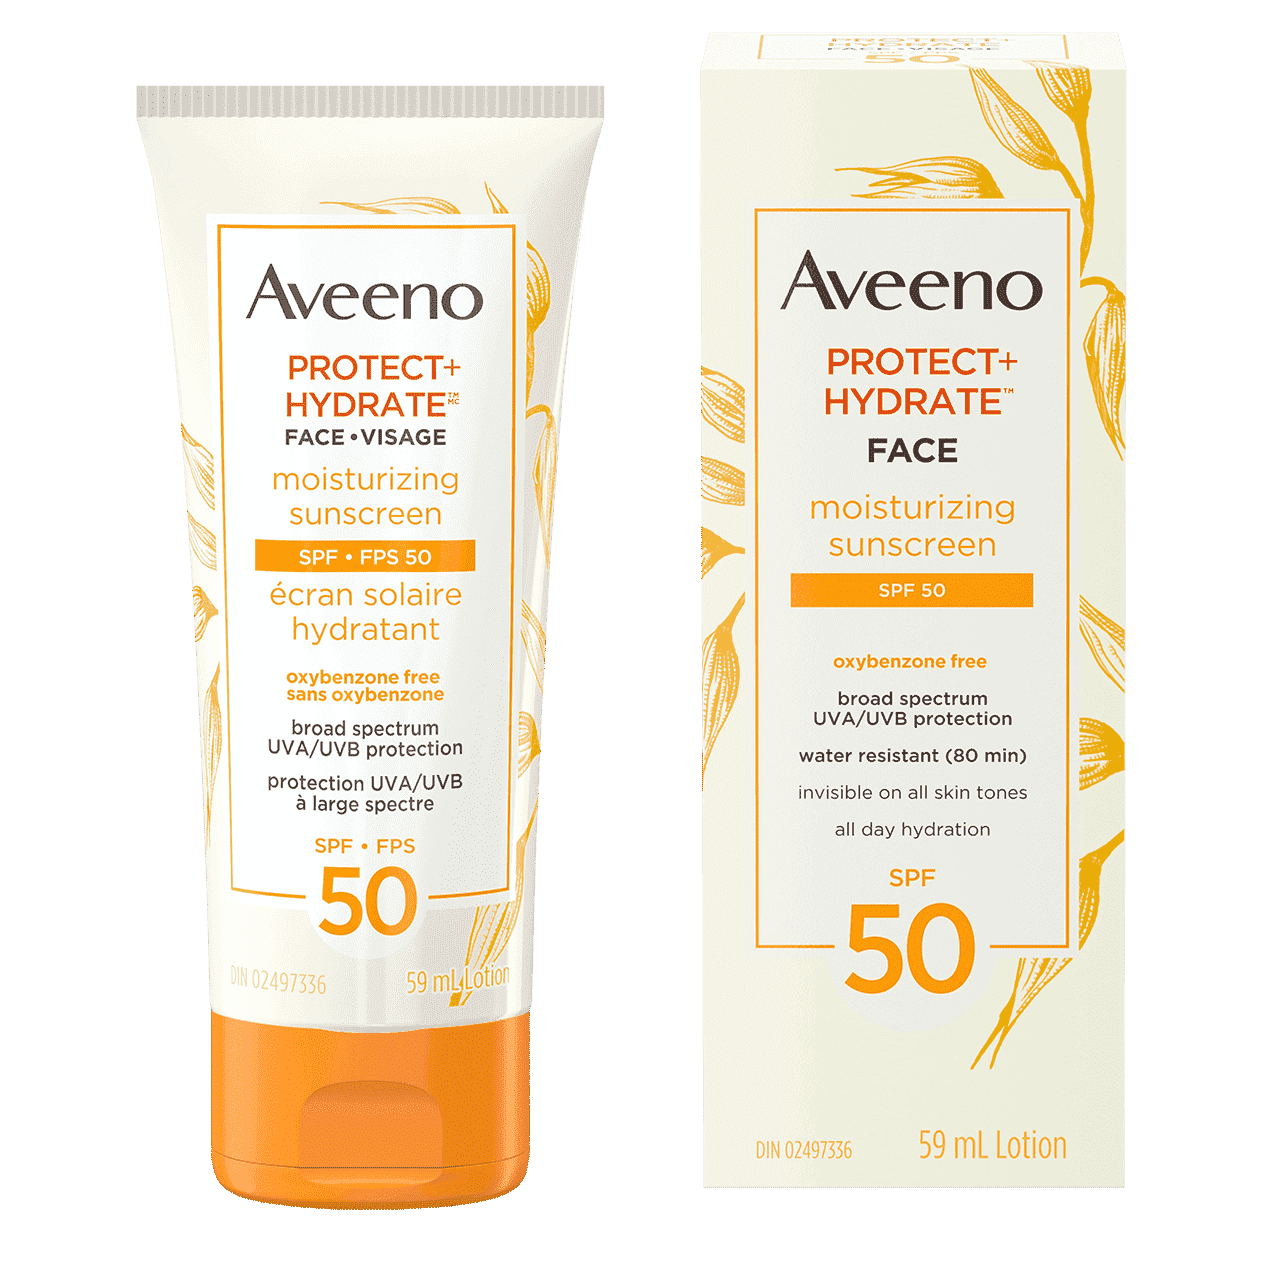 AVEENO® PROTECT + HYDRATE Face Moisturizing Sunscreen SPF 50 tube and package